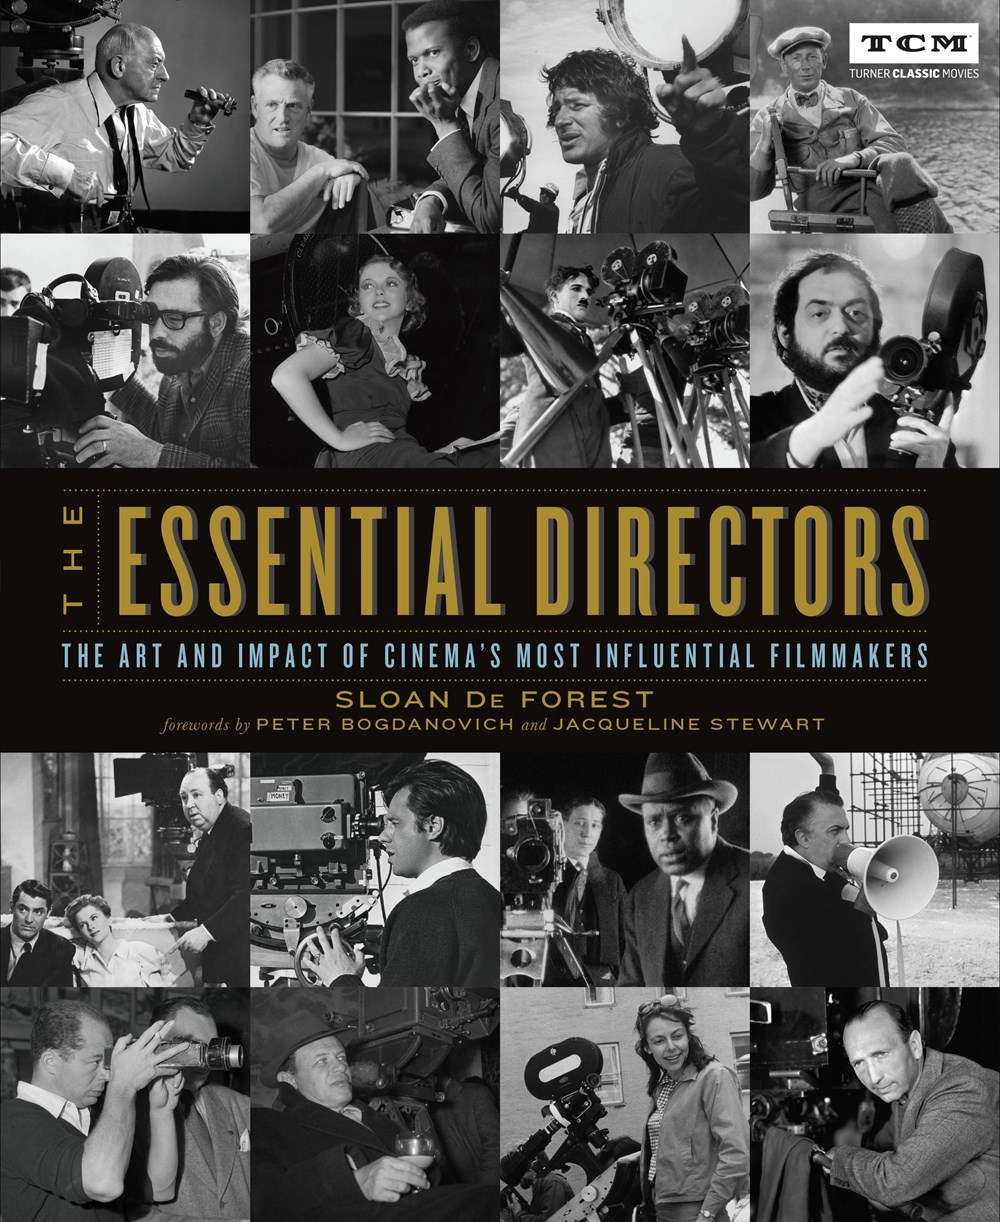 The Essential Directors: The Art and Impact of Cinema’s Most Influential Filmmakers